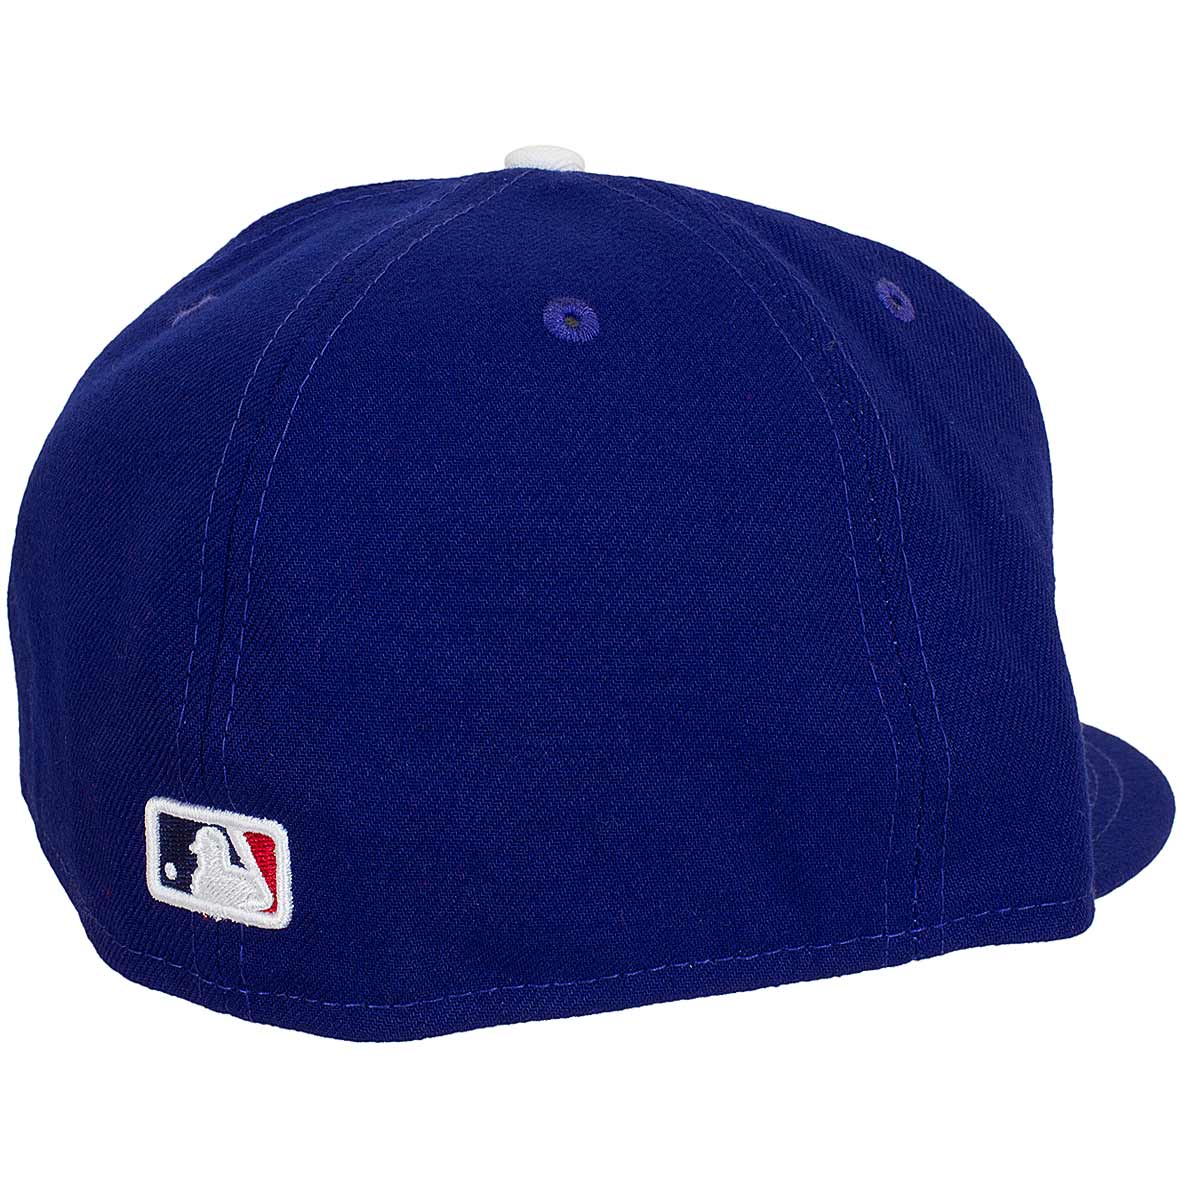 ☆ New Era 59Fifty Fitted Cap Authentic Performance Game L.A.Dodgers Game blau/weiß